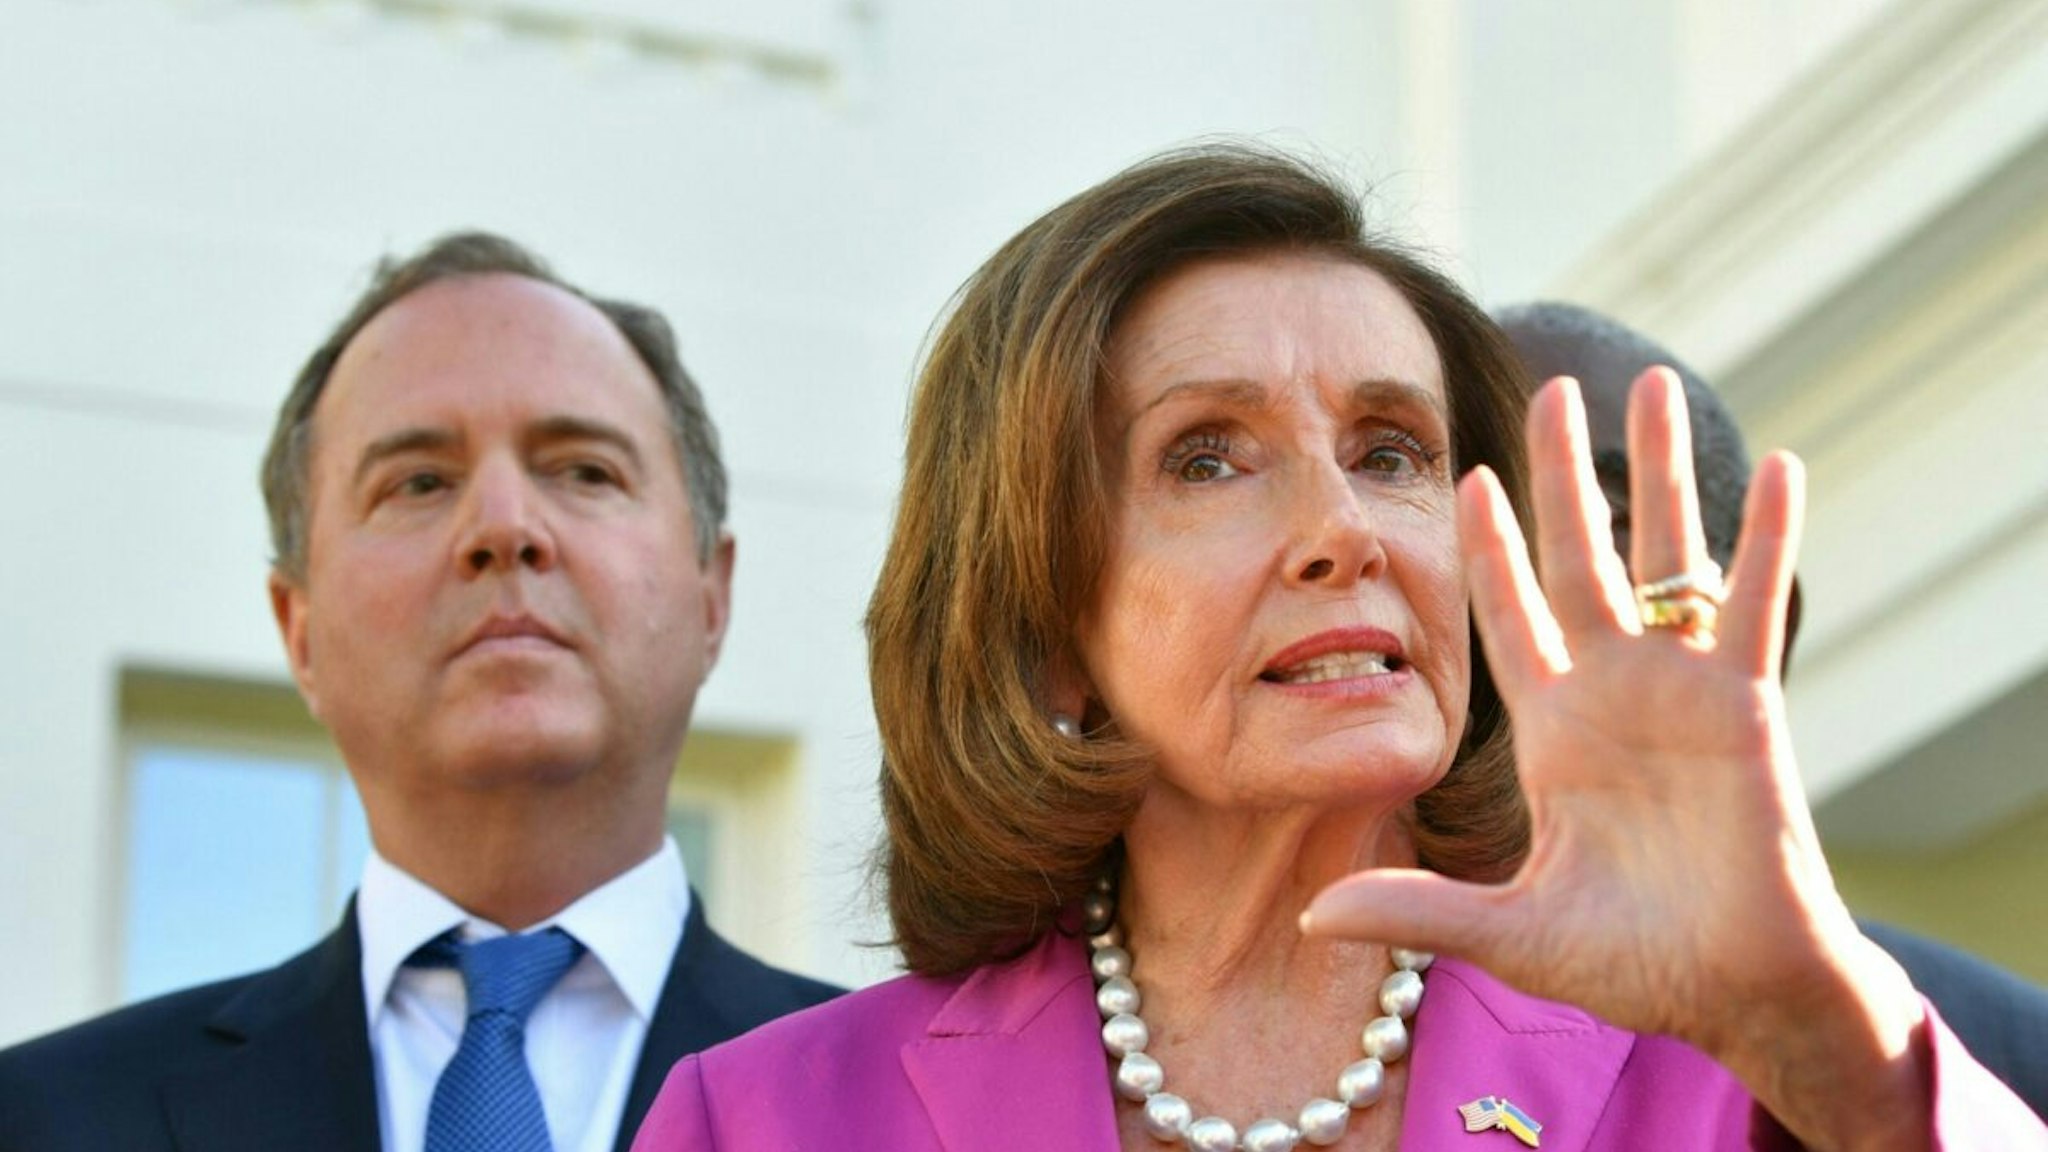 US Representative Adam Schiff (D-CA) (L) listens as US Speaker of the House Nancy Pelosi, alongside members of the Congressional delegation that recently visited Ukraine, speaks to reporters following a meeting with US President Joe Biden at the White House in Washington, DC, on May 10, 2022.